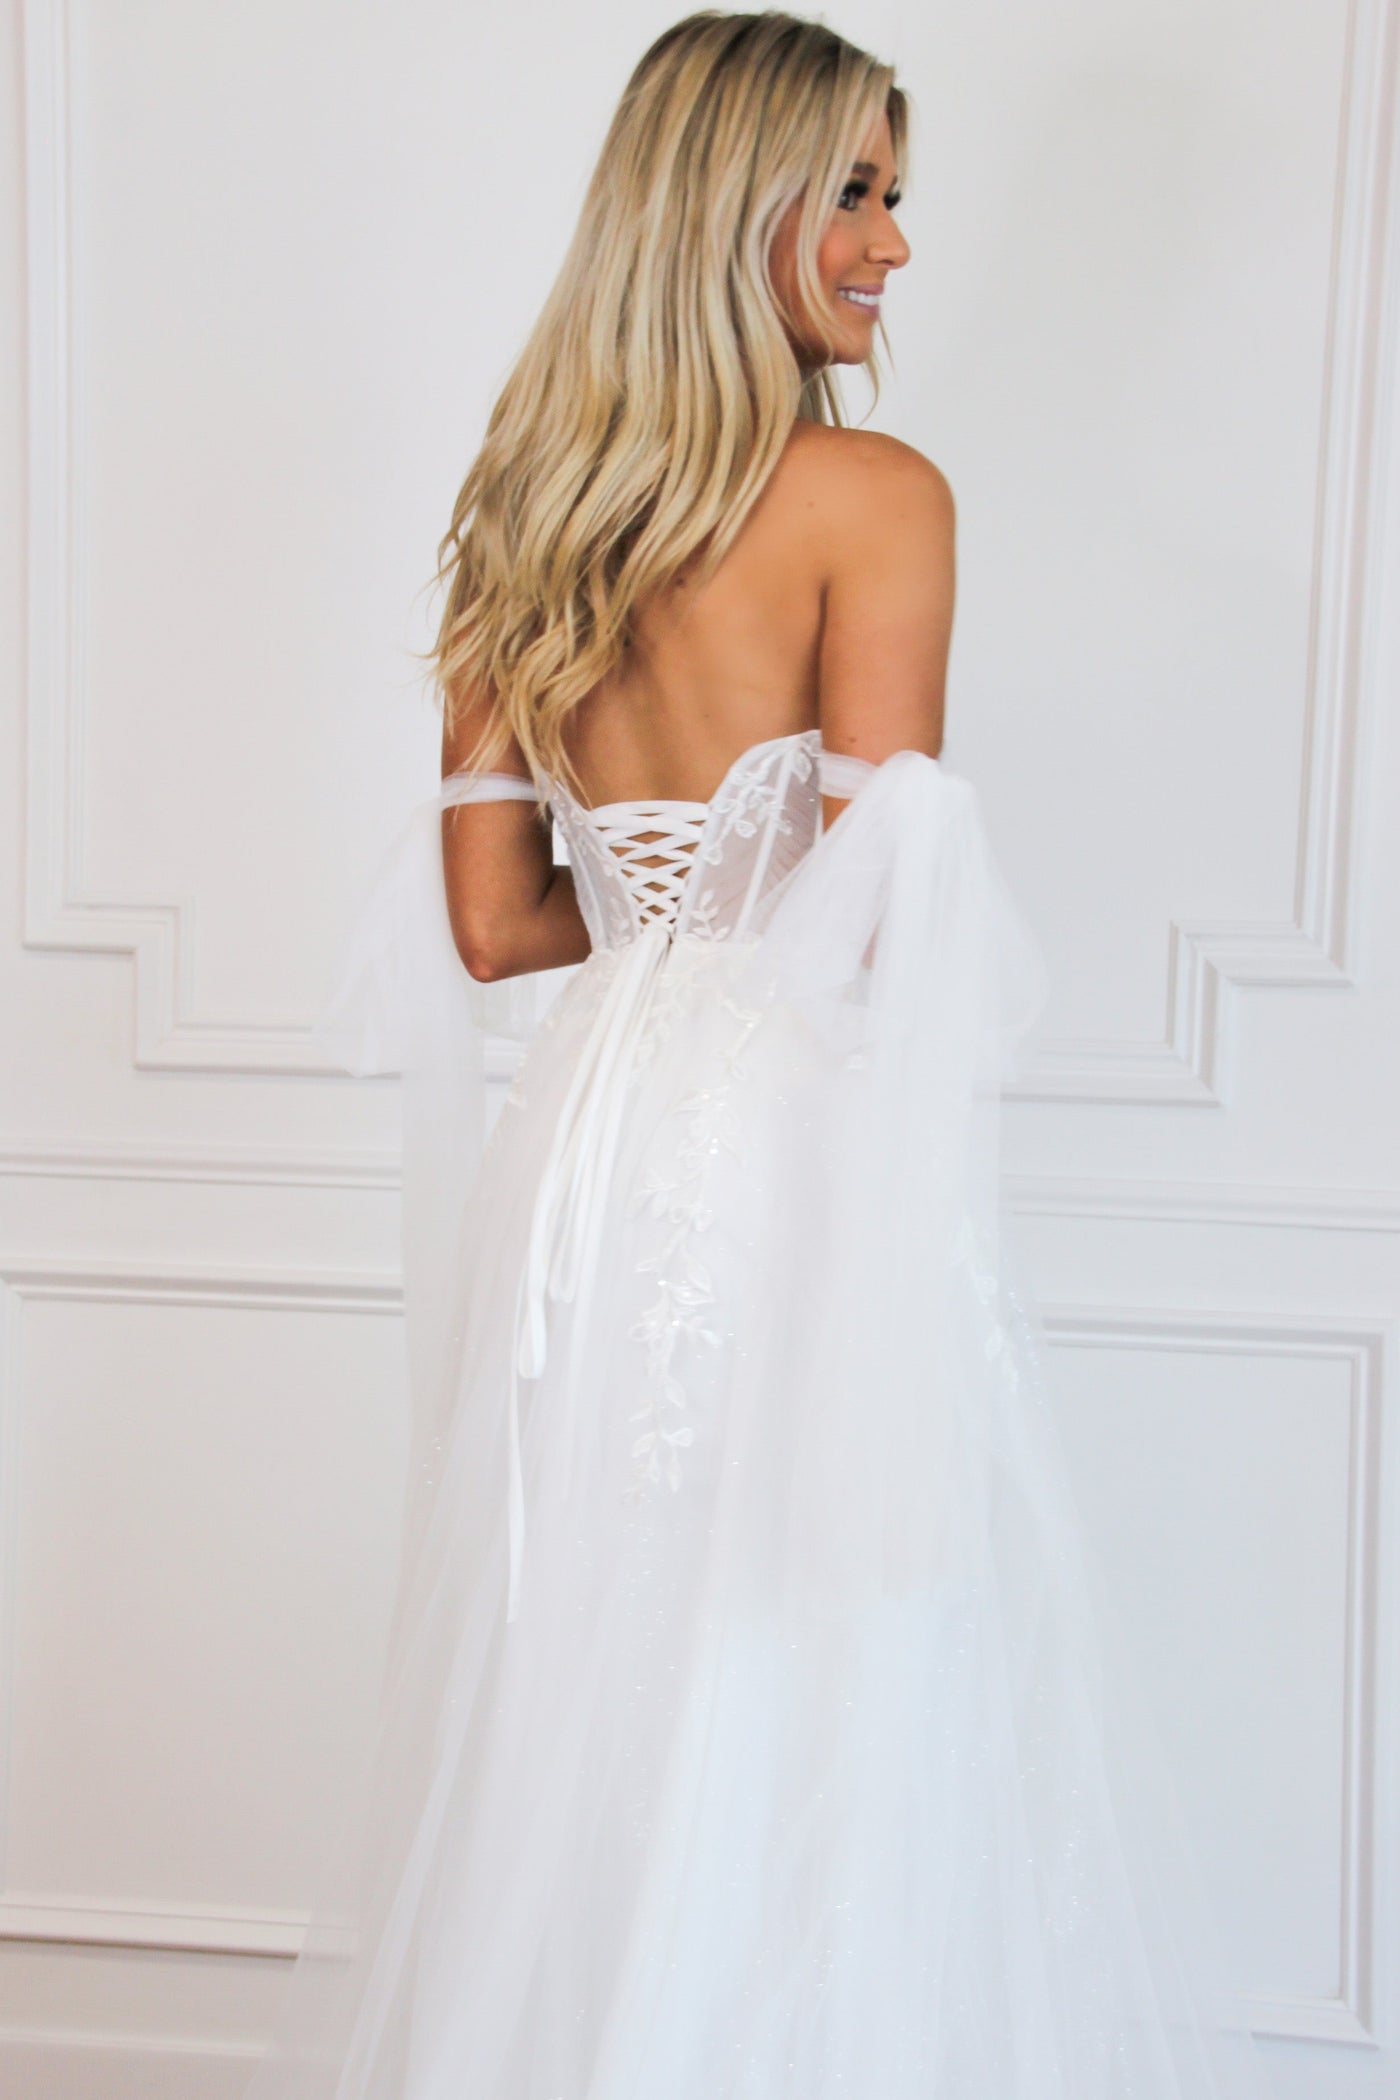 Reina Bustier Tulle Slit Wedding Dress: Off White - Bella and Bloom Boutique